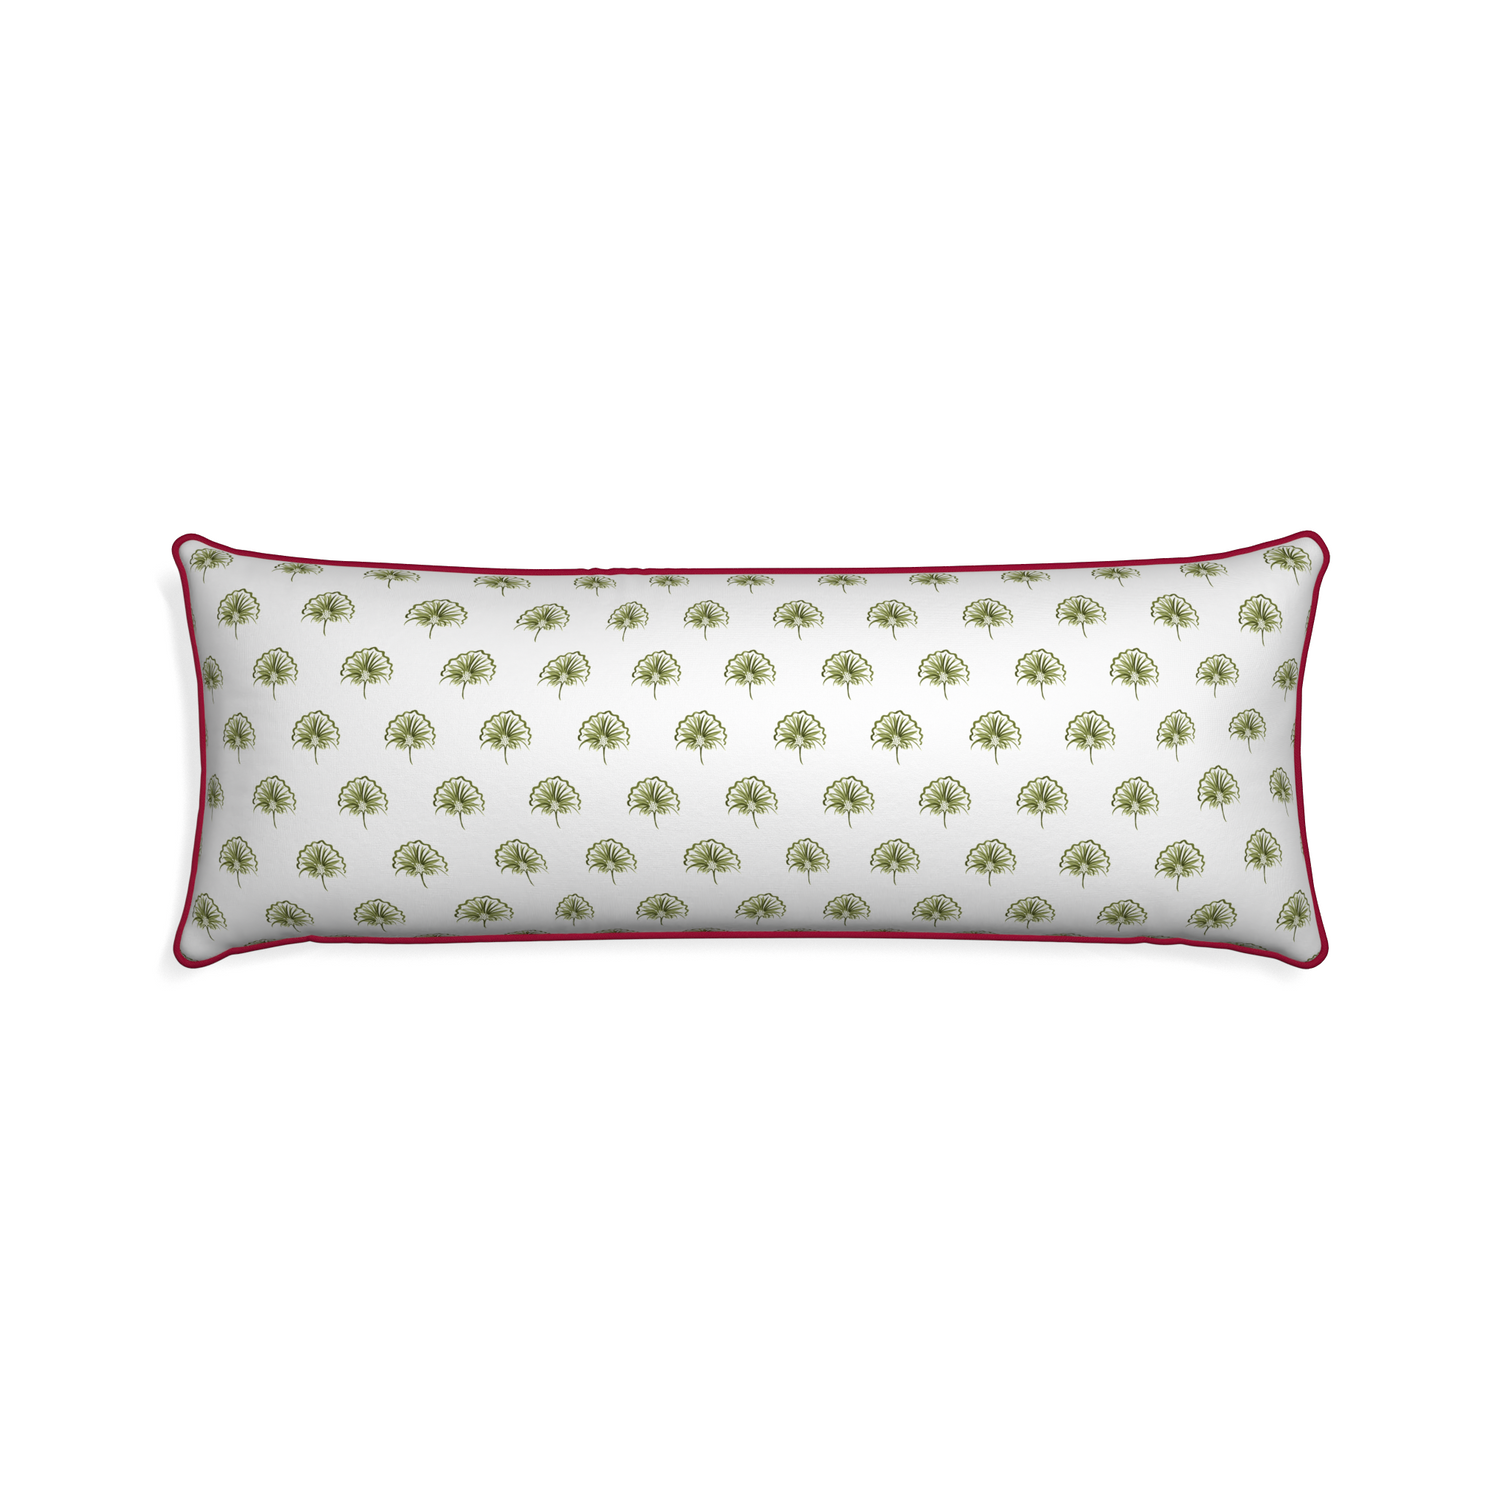 Xl-lumbar penelope moss custom green floralpillow with raspberry piping on white background